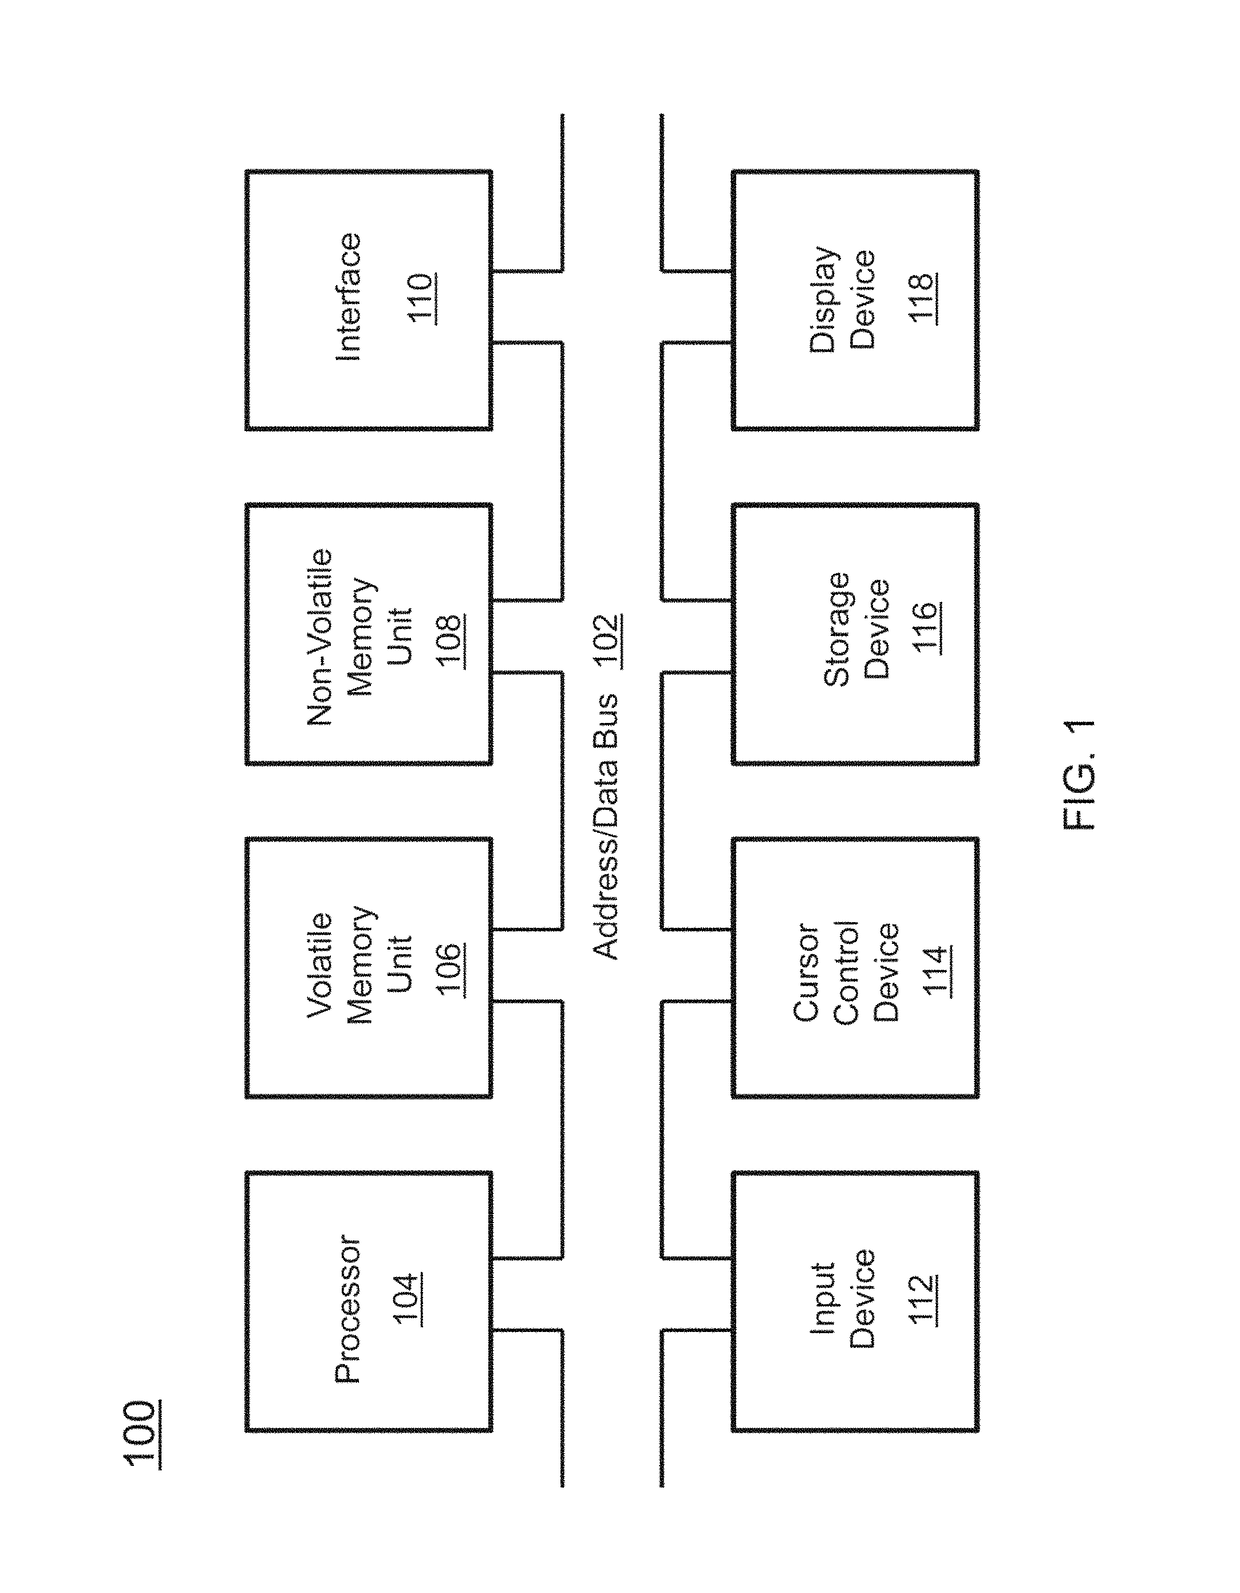 Cognitive architecture for wideband, low-power, real-time signal denoising